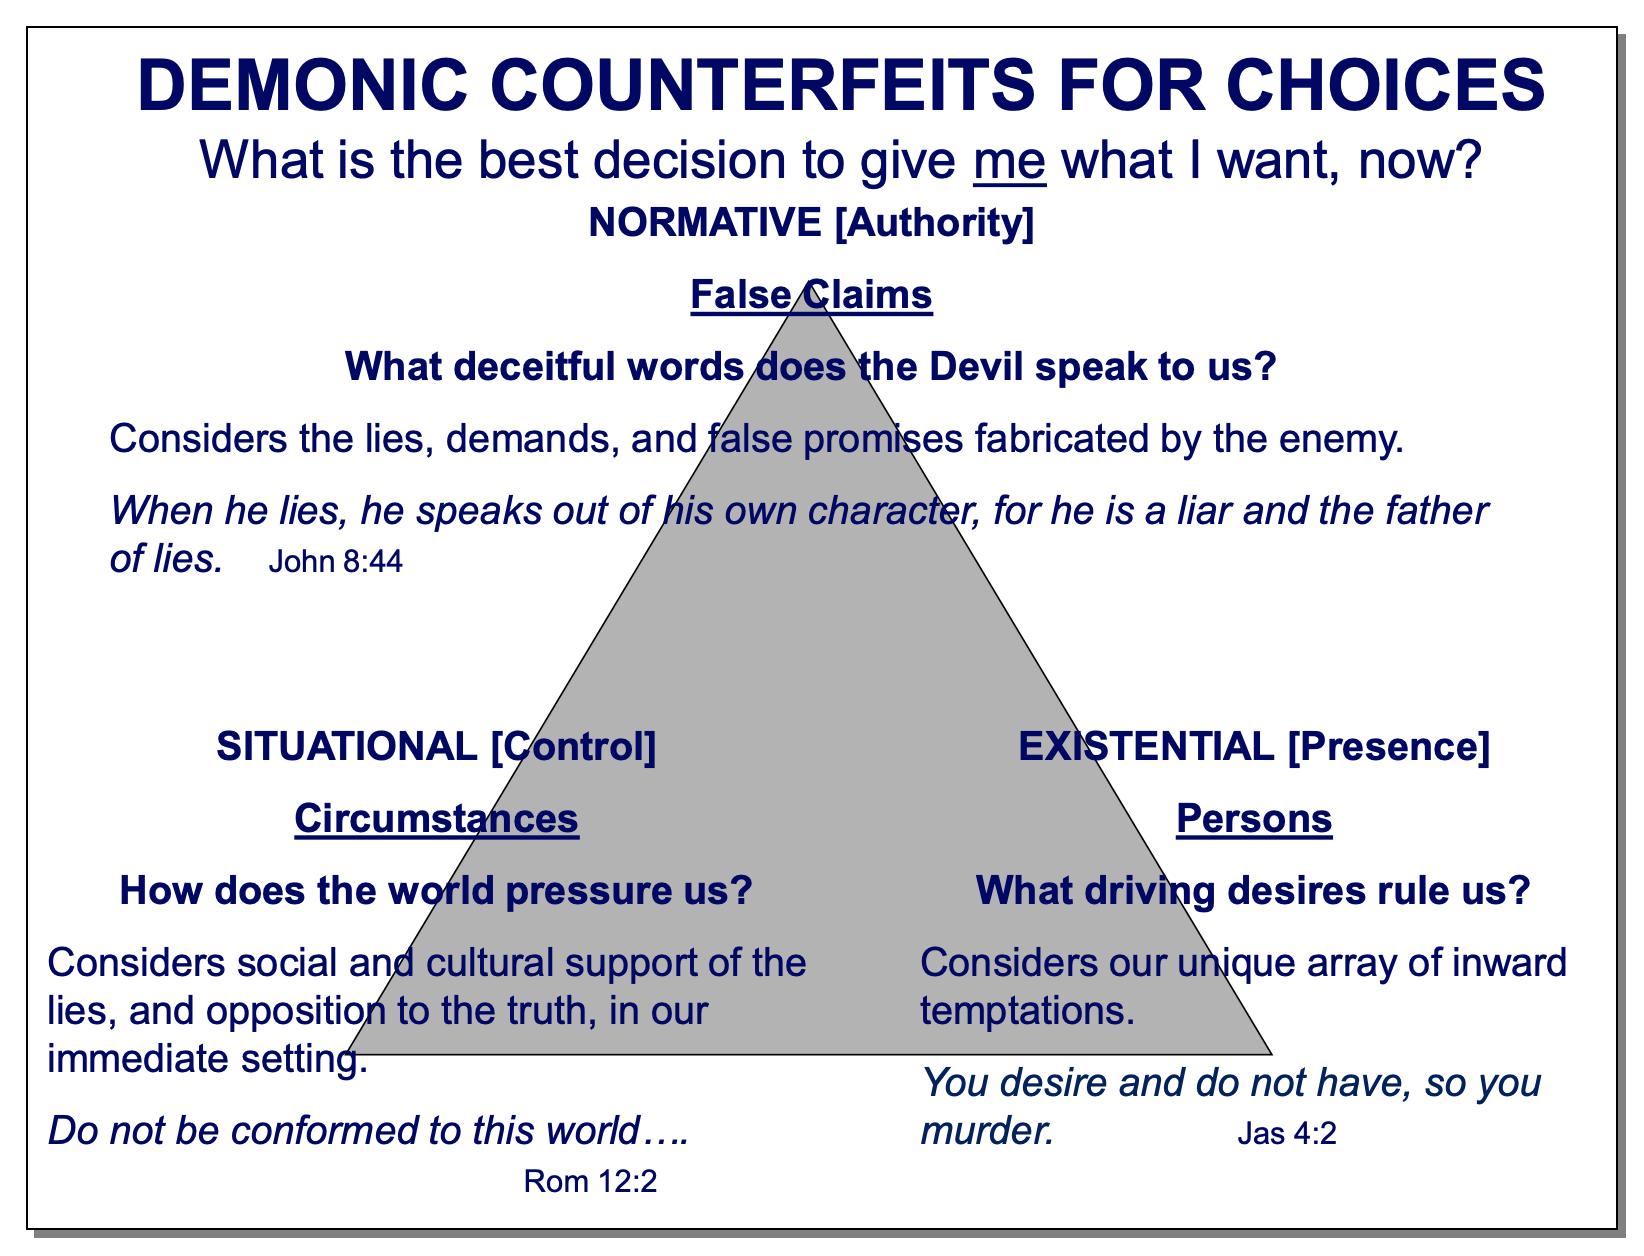 Demonic Counterfeits for Choices